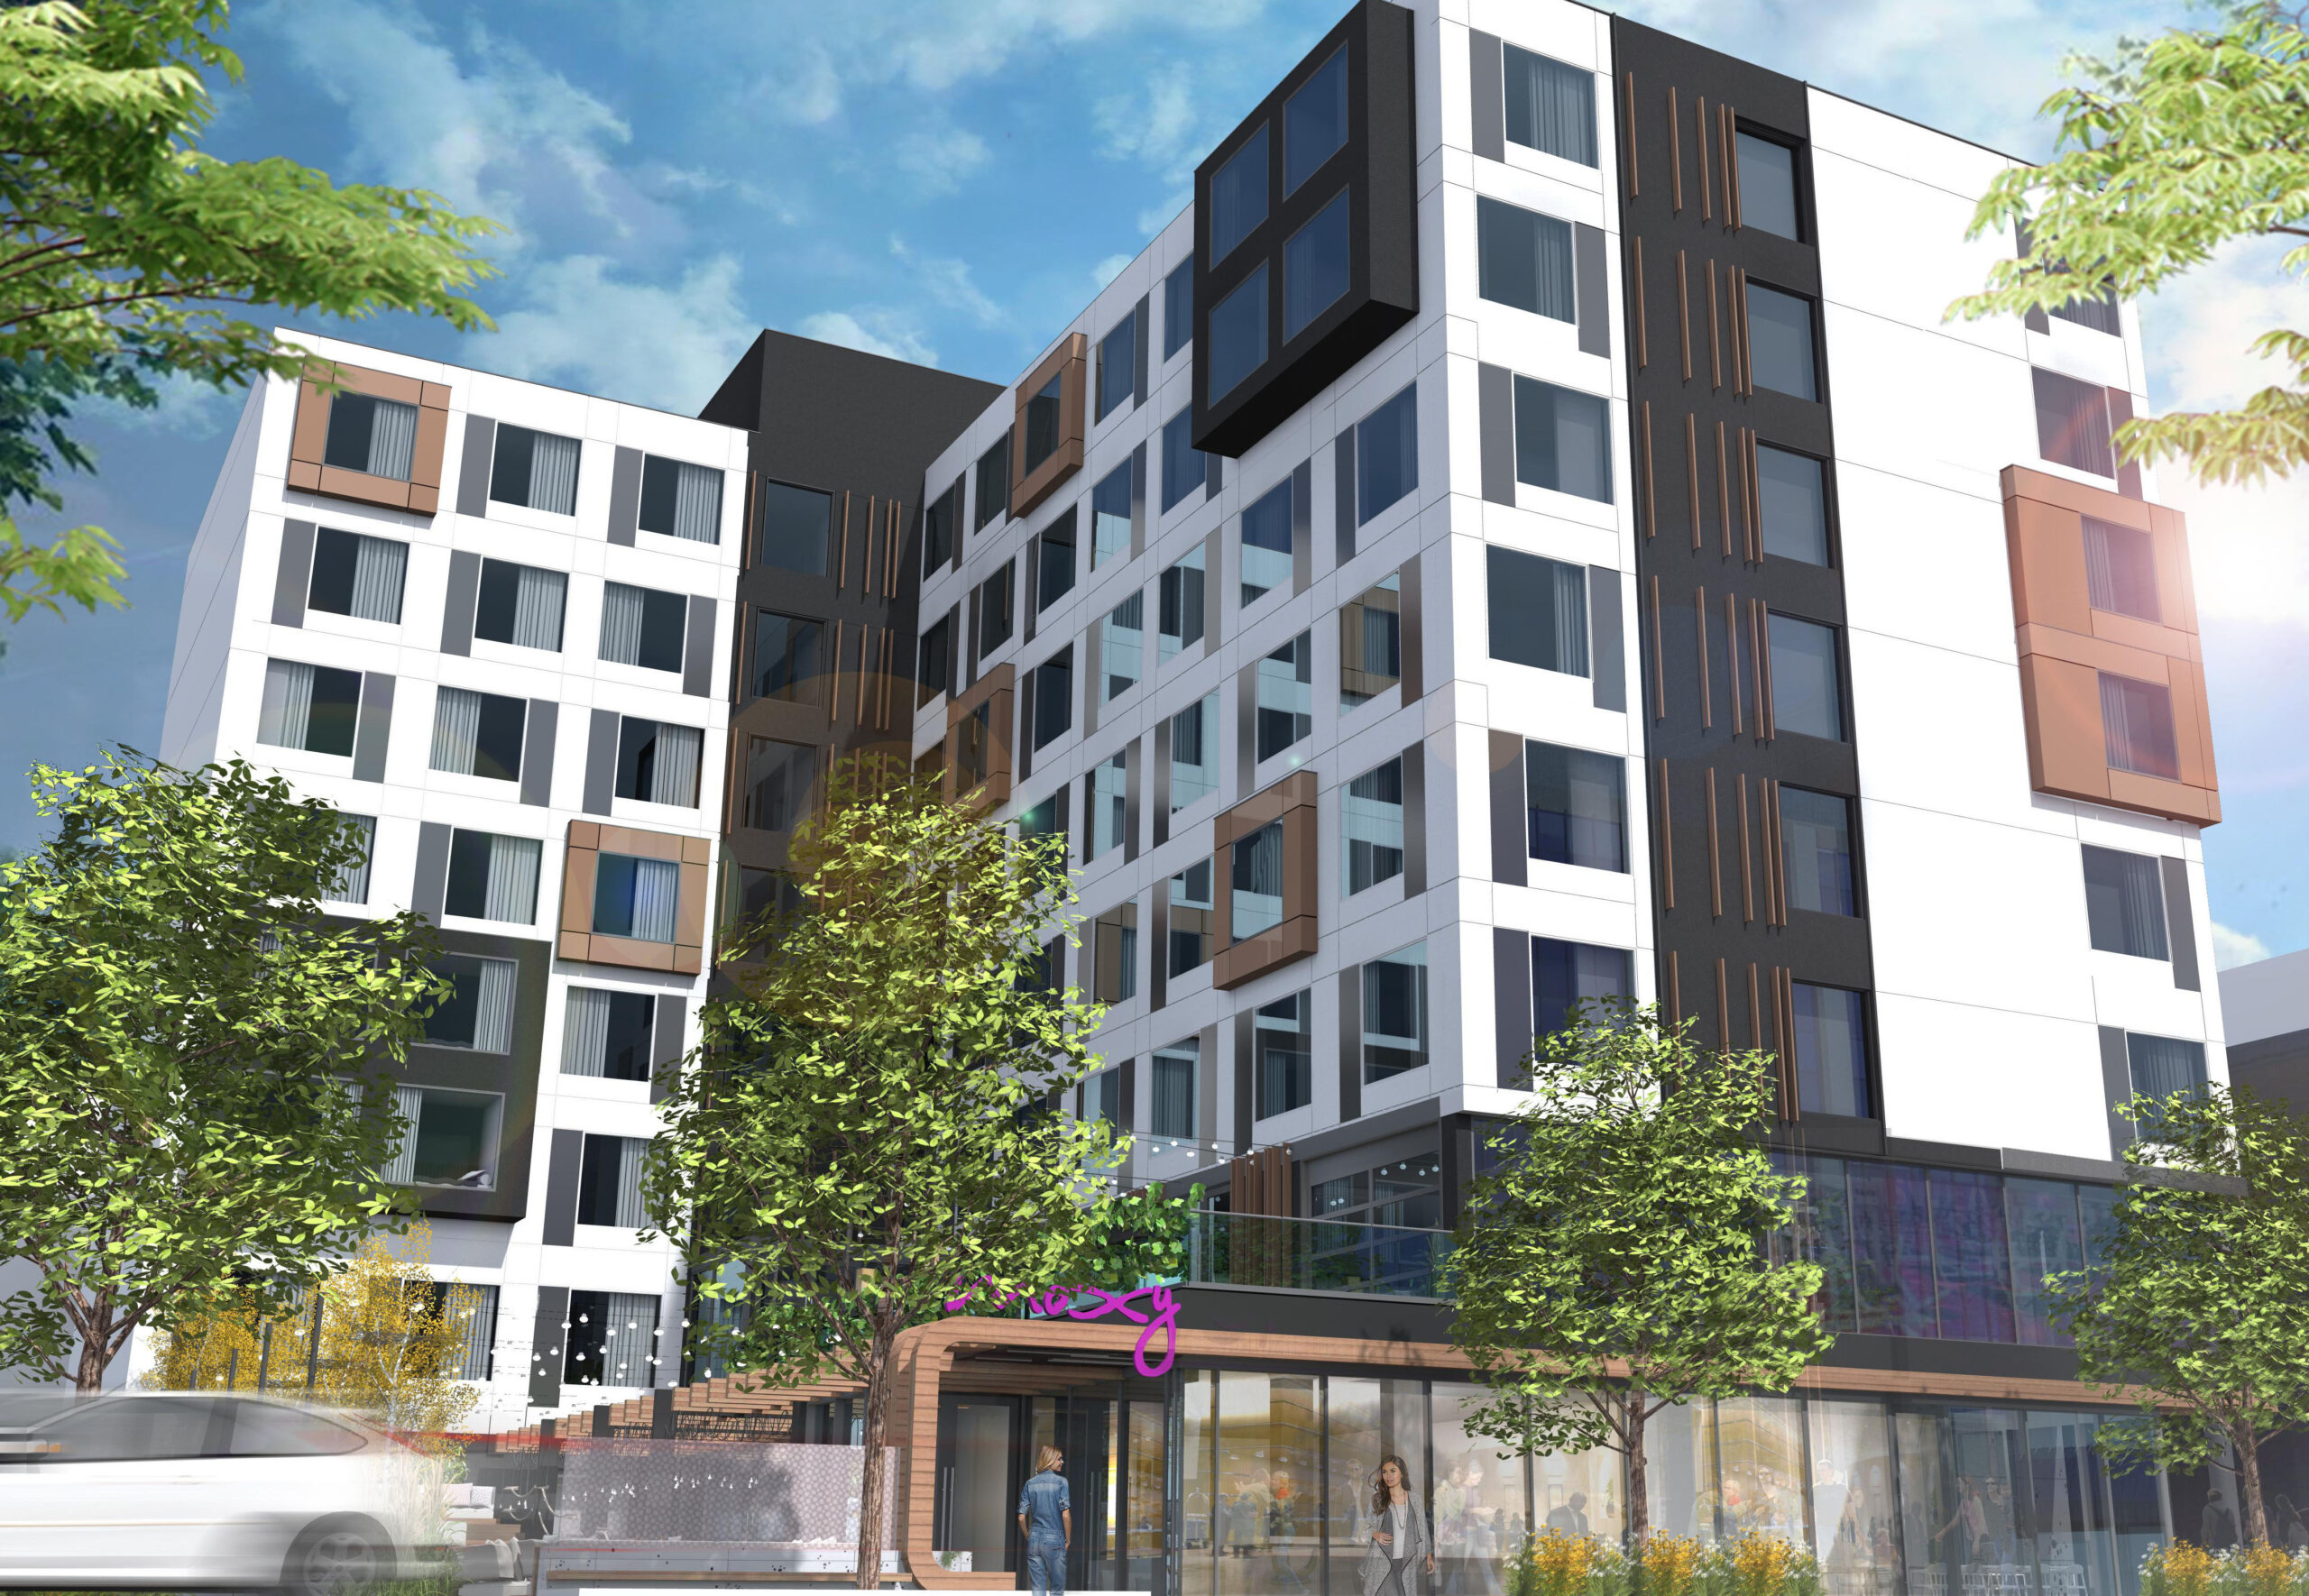 An artist's rendering of the Marriott Moxy Hotel in Cherry Creek, a project by BMC Investments.